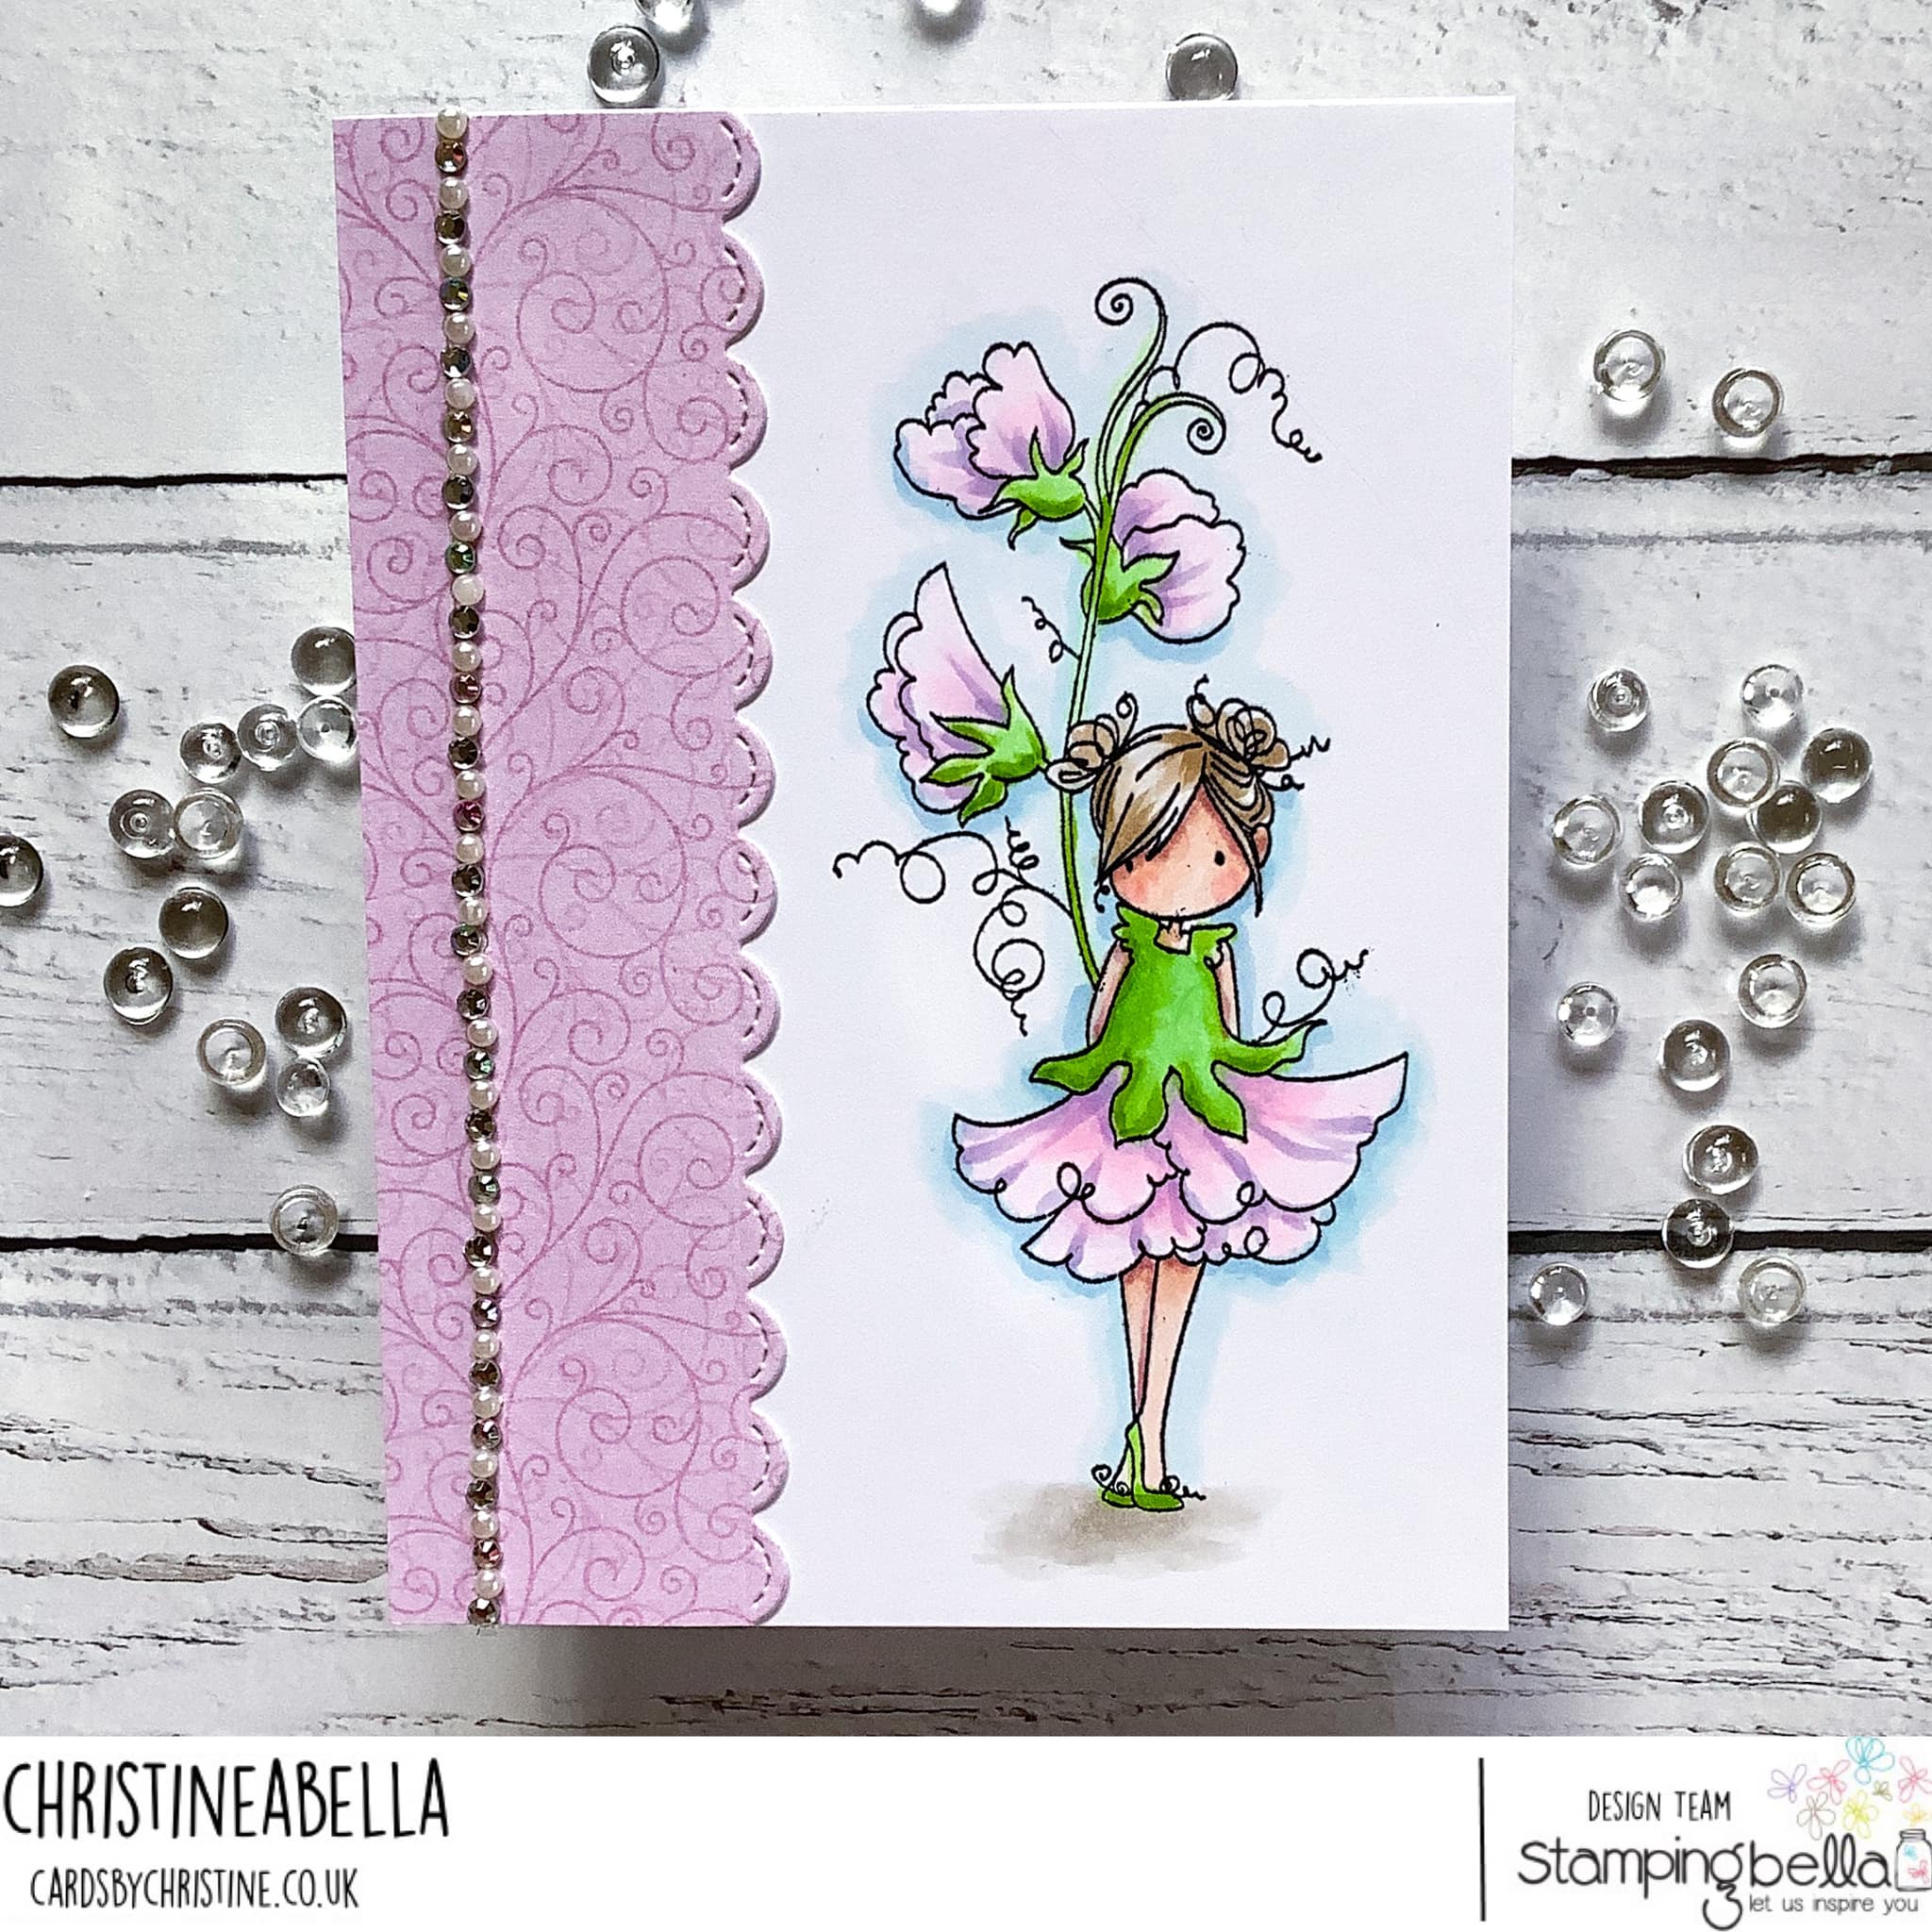 www.stampingbella.com: rubber stamp used: TINY TOWNIE GARDEN GIRL SWEET PEA card by Christine LEvison